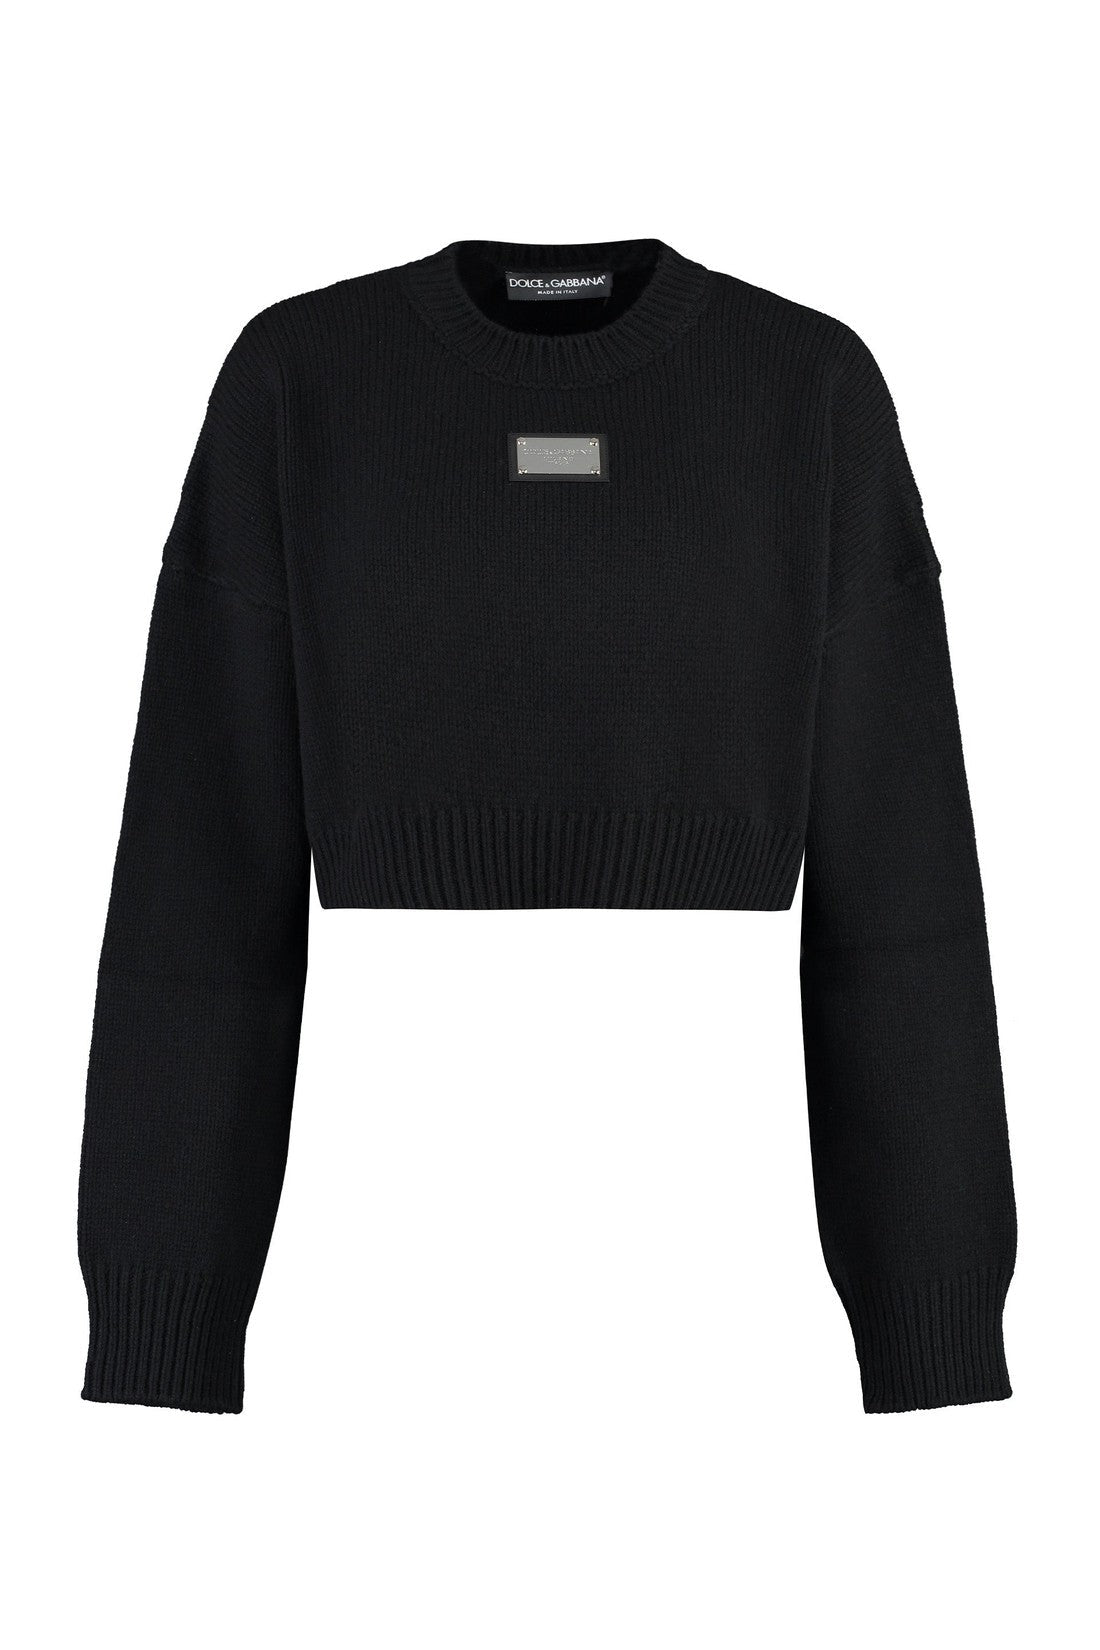 Dolce & Gabbana-OUTLET-SALE-Virgin wool and cashmere pullover-ARCHIVIST